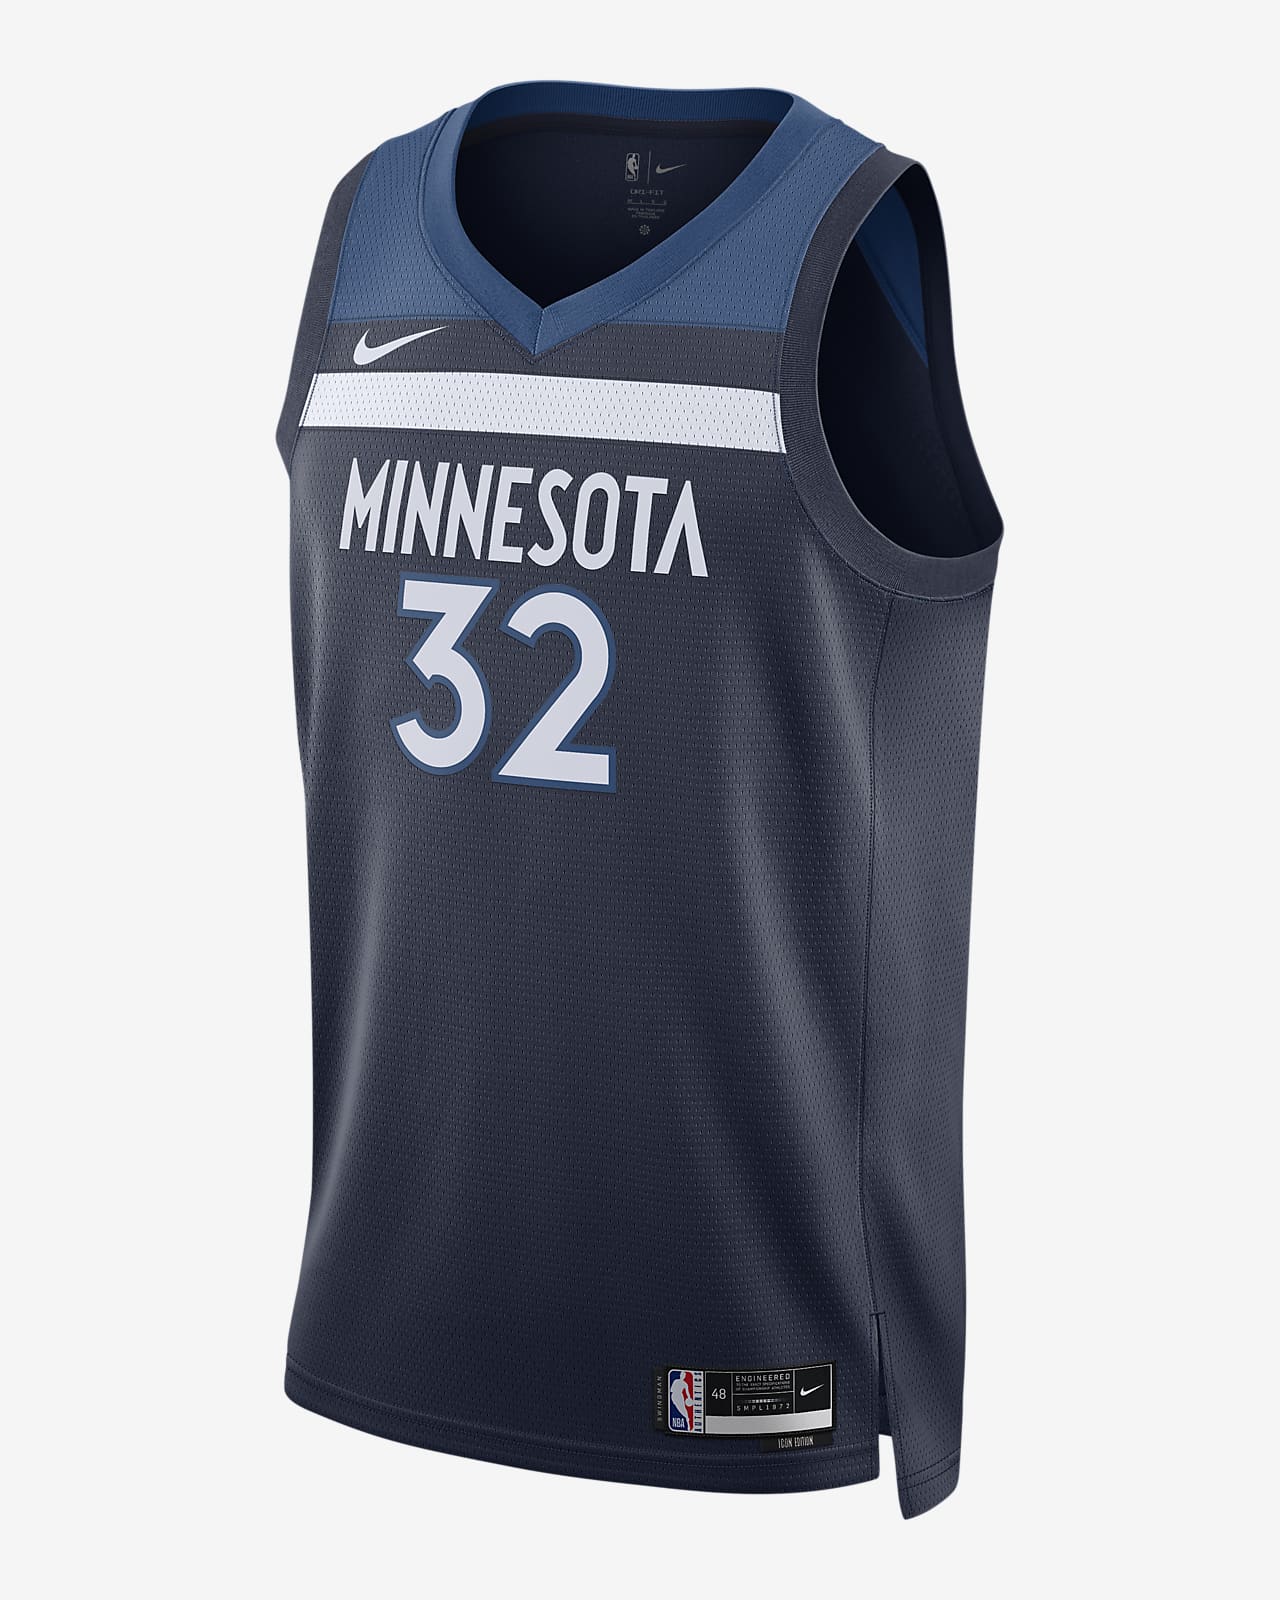 What we know about the Timberwolves' final jersey design